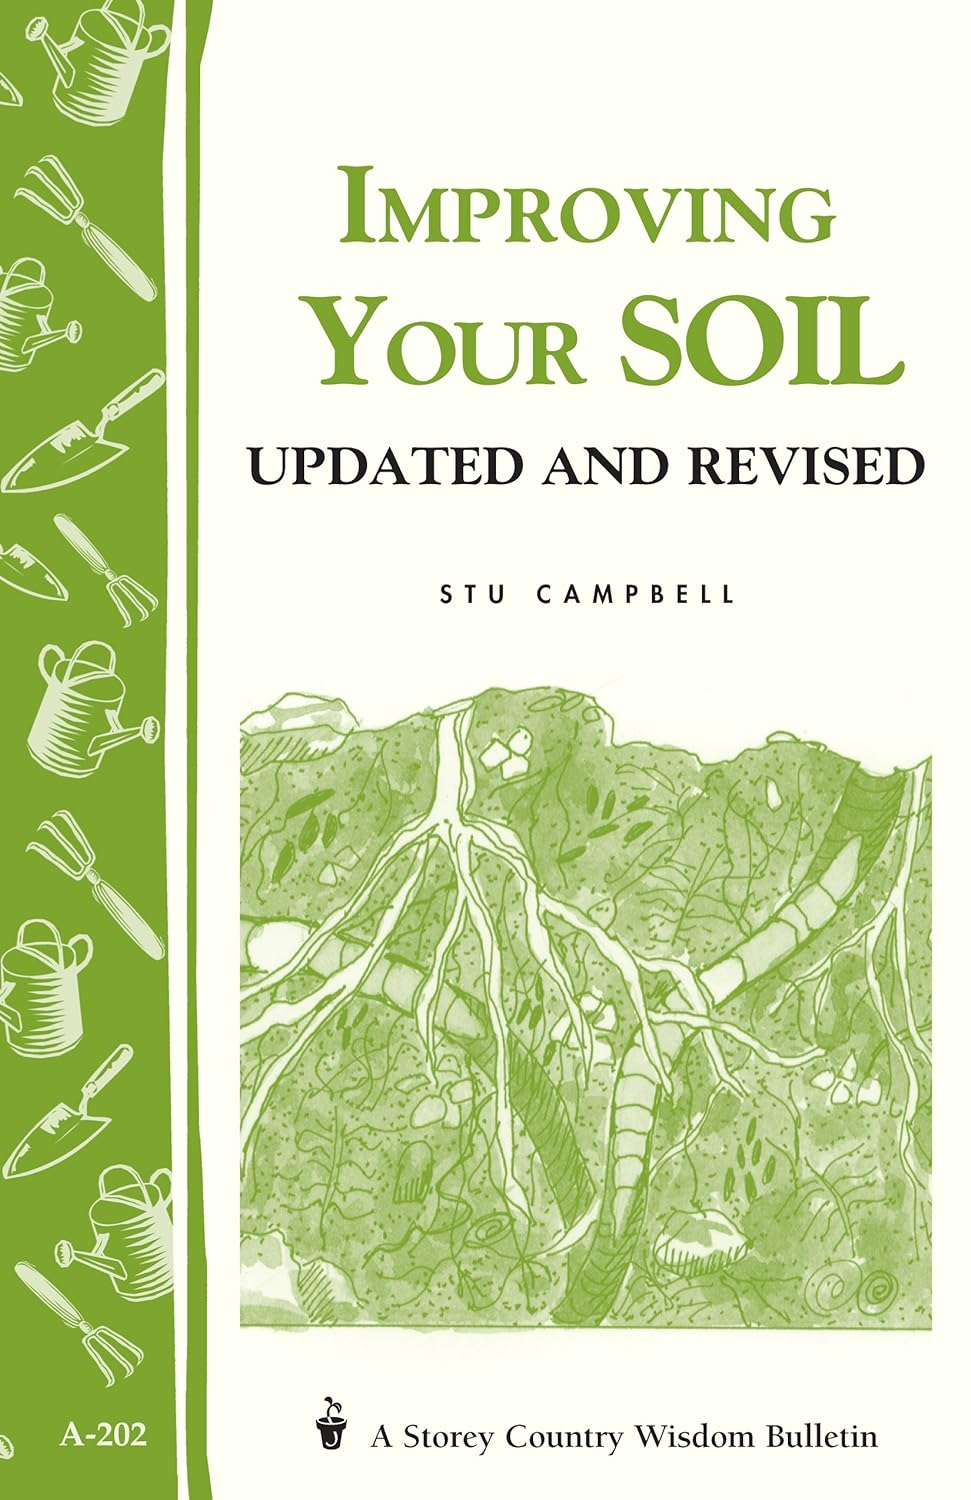 Storey’s Country Wisdom Bulletin: Improving Your Soil - by Stu Campbell